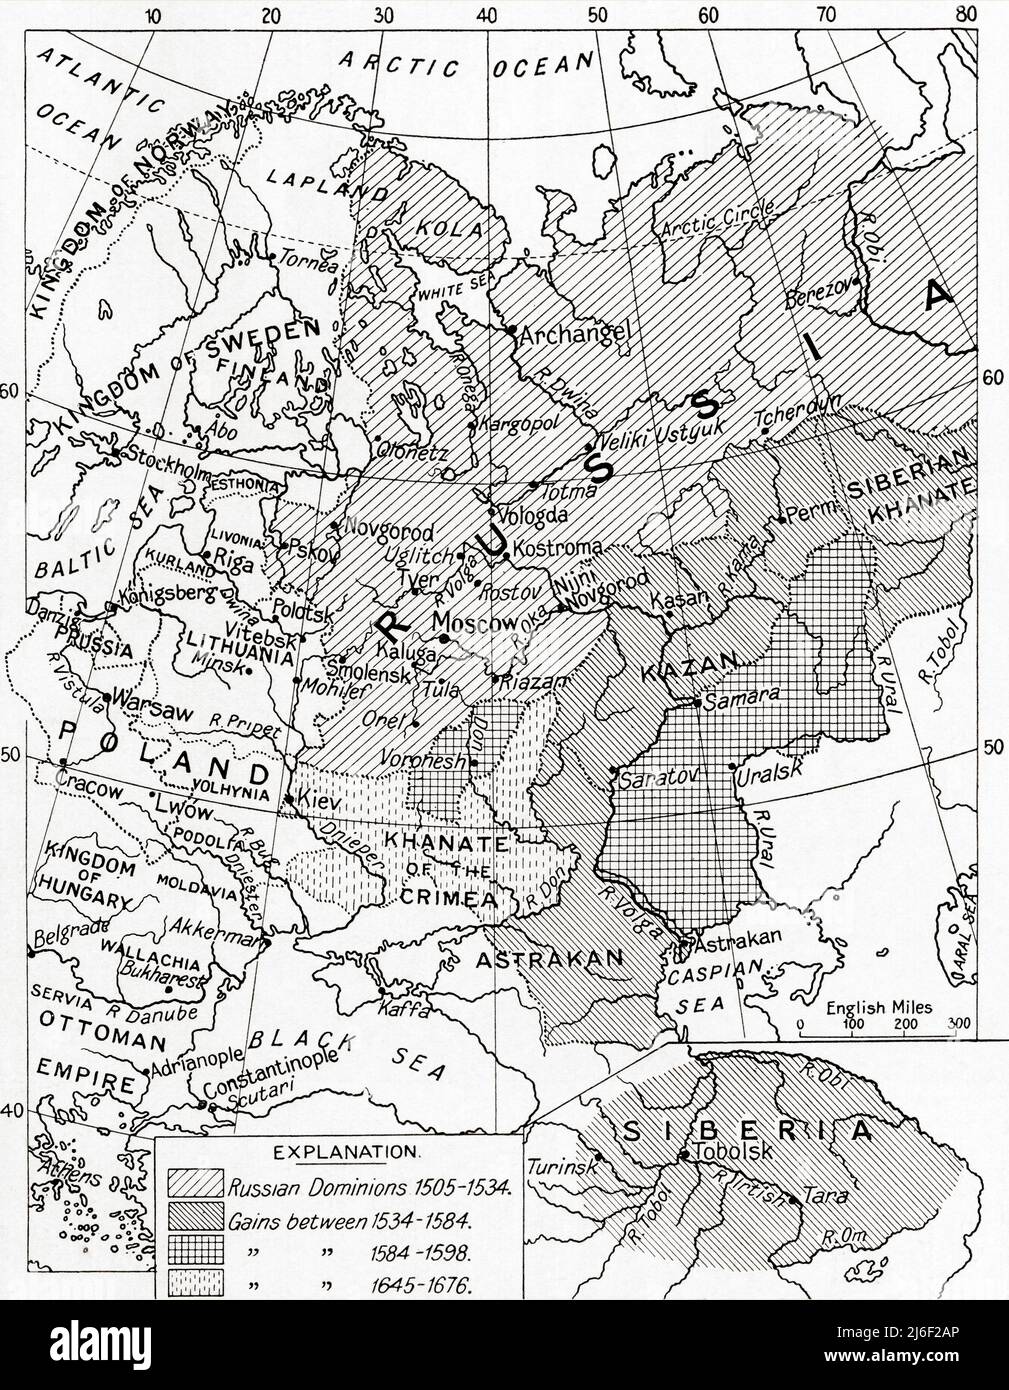 Map of Russia in the 16th and 17th centuries. Stock Photo